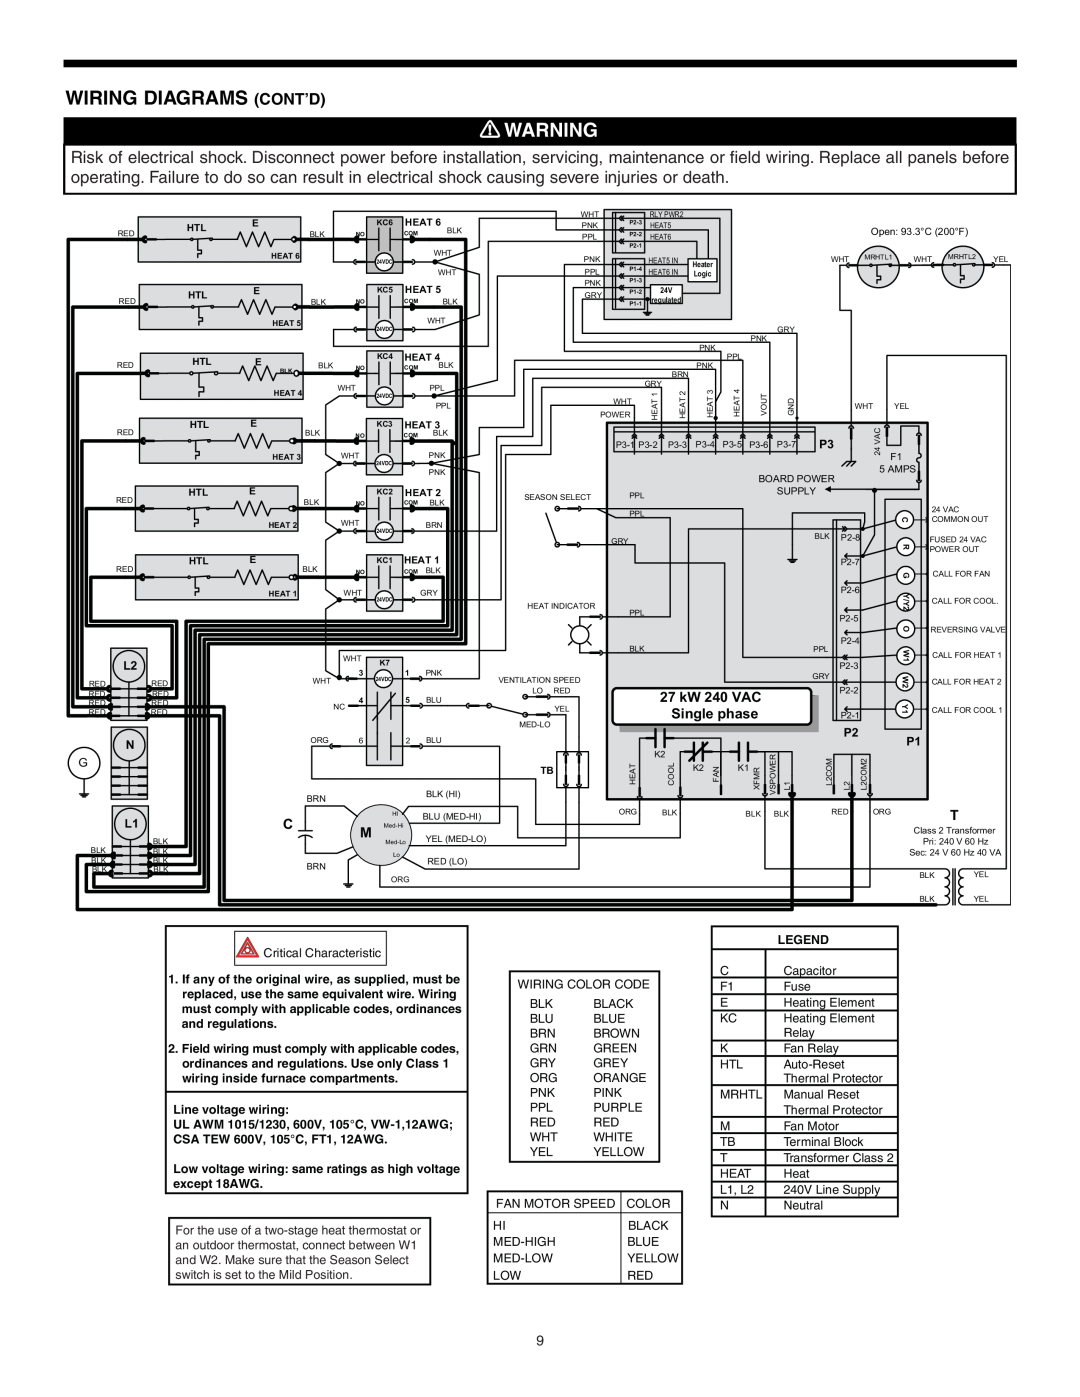 Broan D SERIES ELECTRIC FURNACE, 30042432A warranty Wiring Diagrams Cont’D, 27 kW 240 VAC, Single phase 